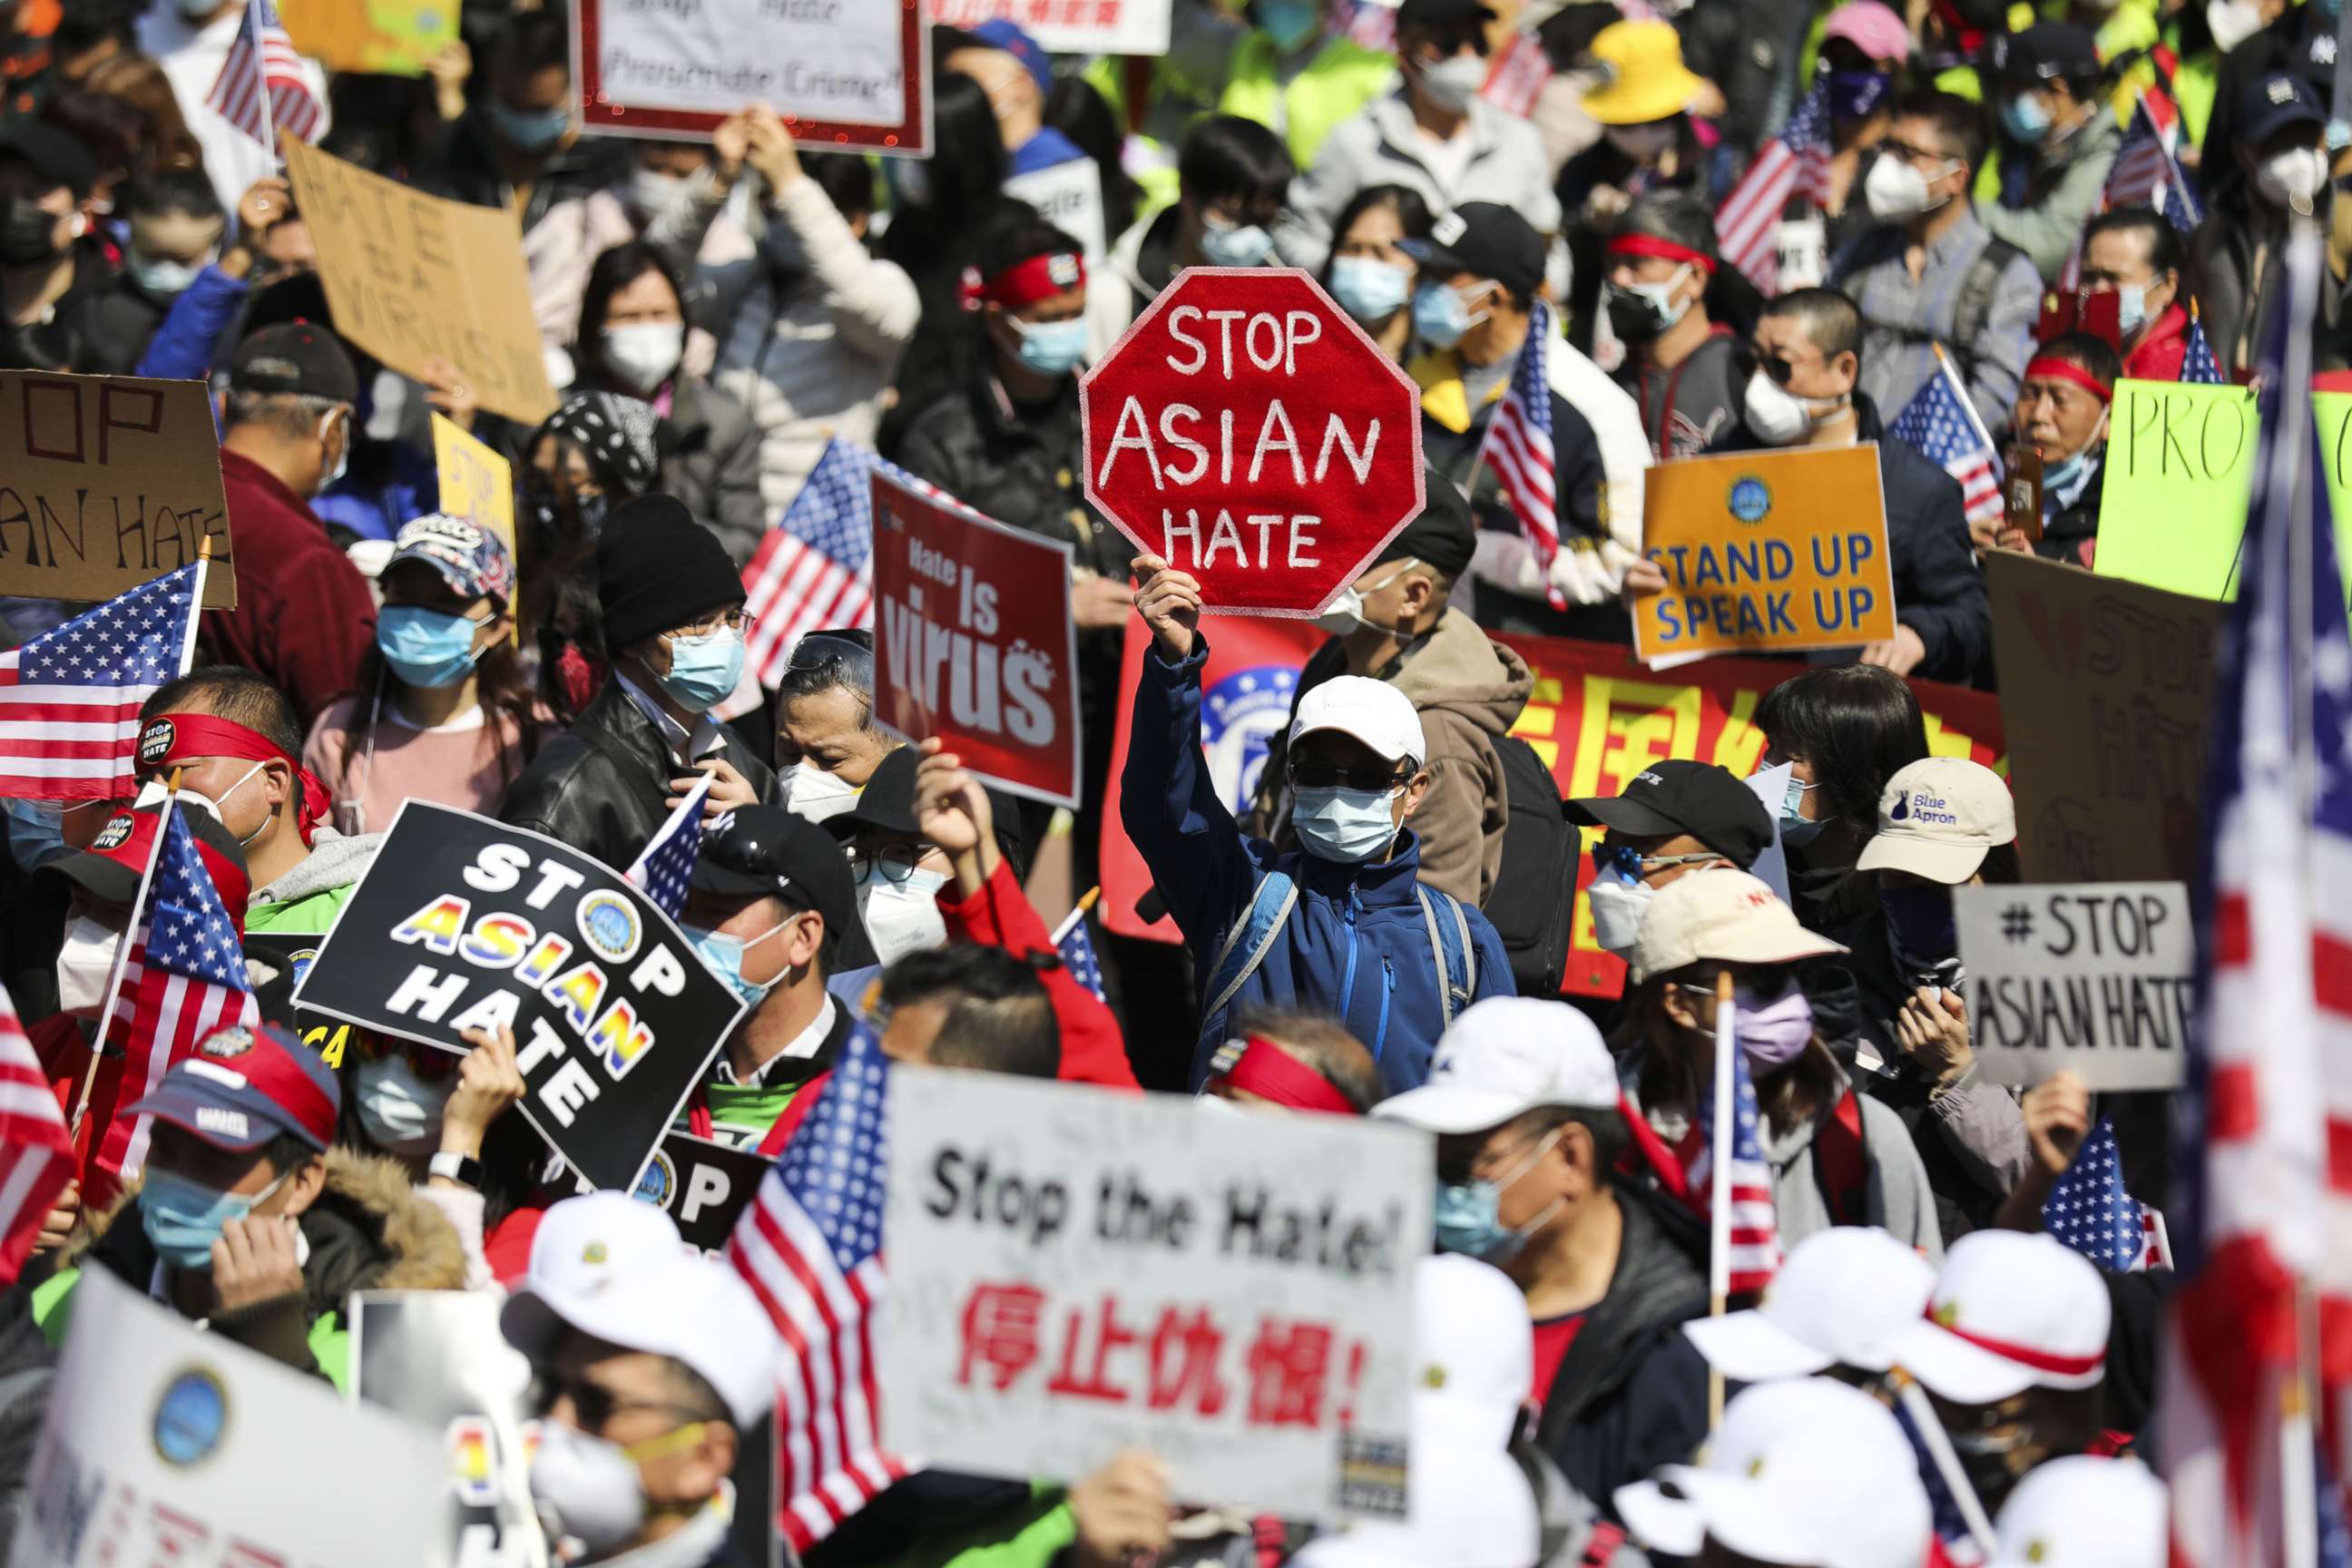 PHOTO: People rally to protest against anti-Asian hate crimes on Foley Square in New York, April 4, 2021.